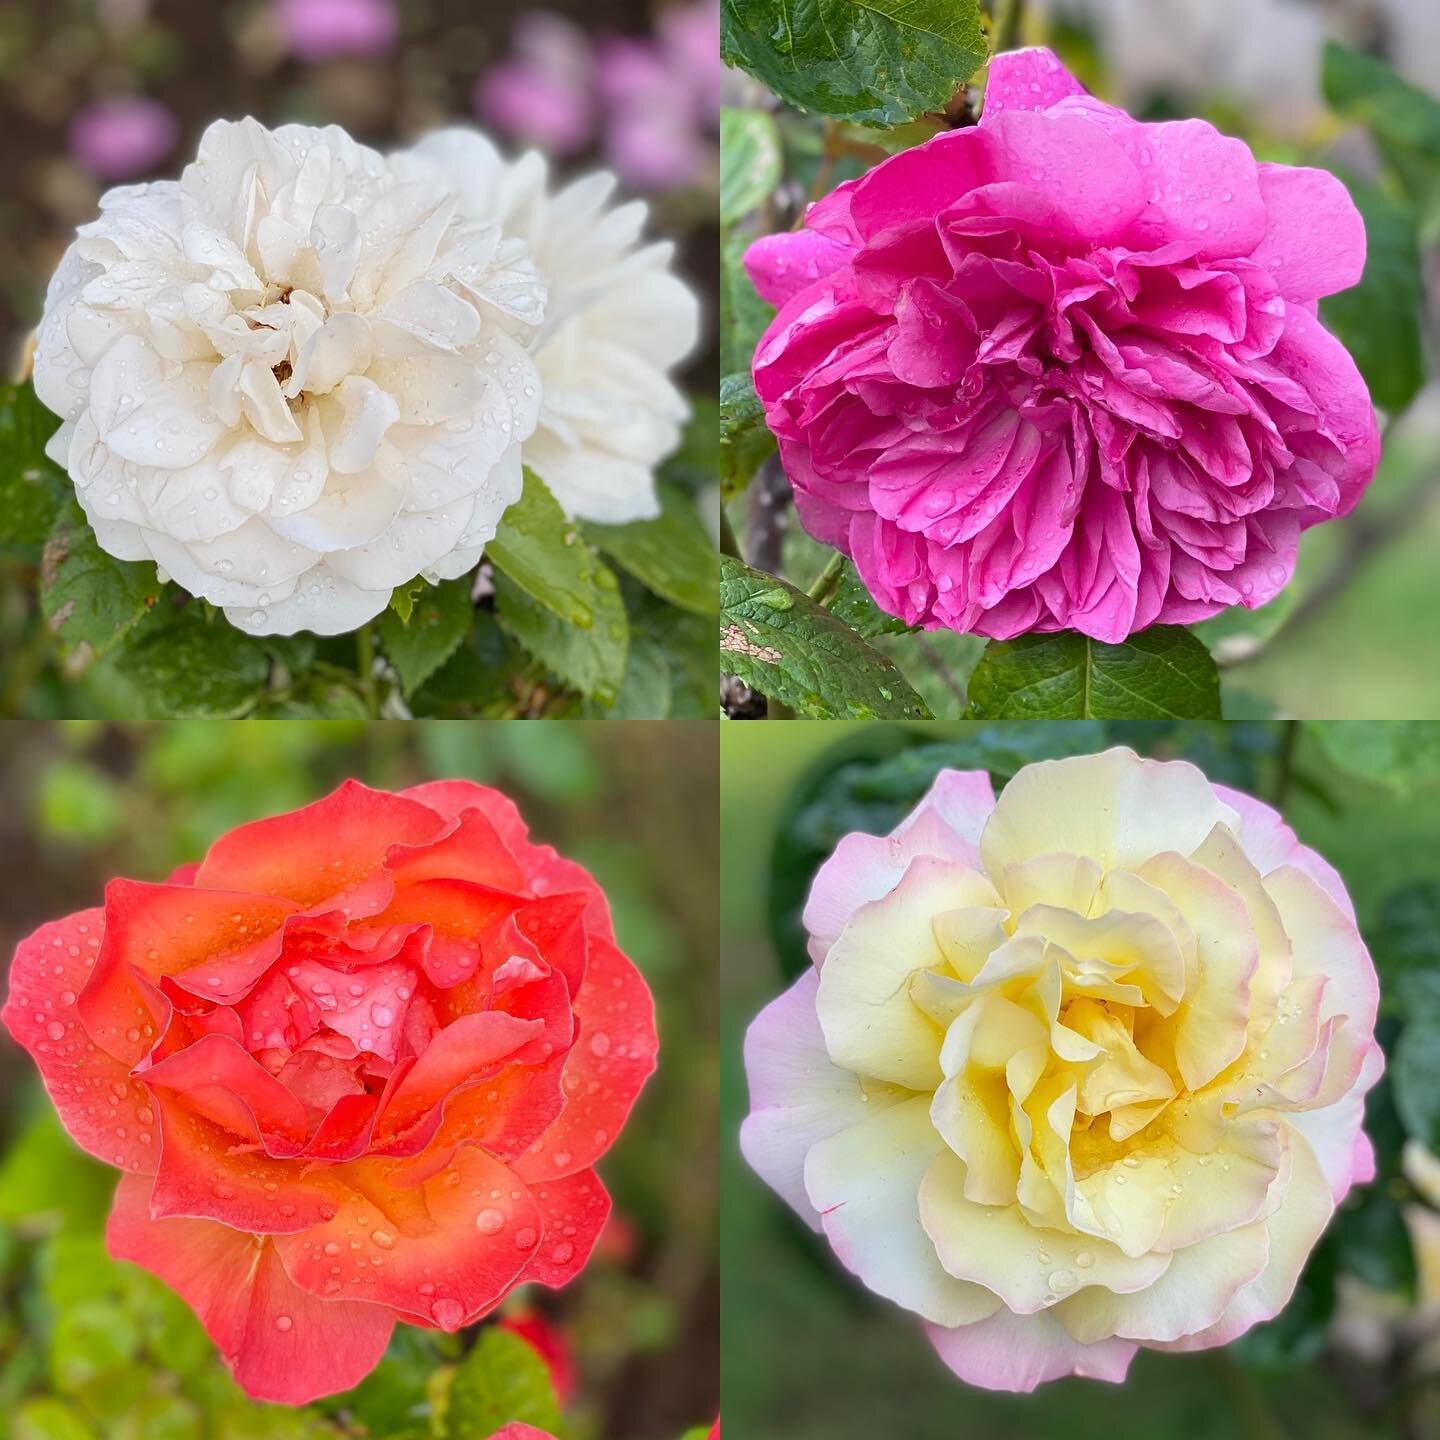 After the lovely spell of hot weather, our roses are producing some beautiful blooms. #roses #garden #gardening #scottishsummer #homegarden #homegardening #home #summer #wondersofnature #nature